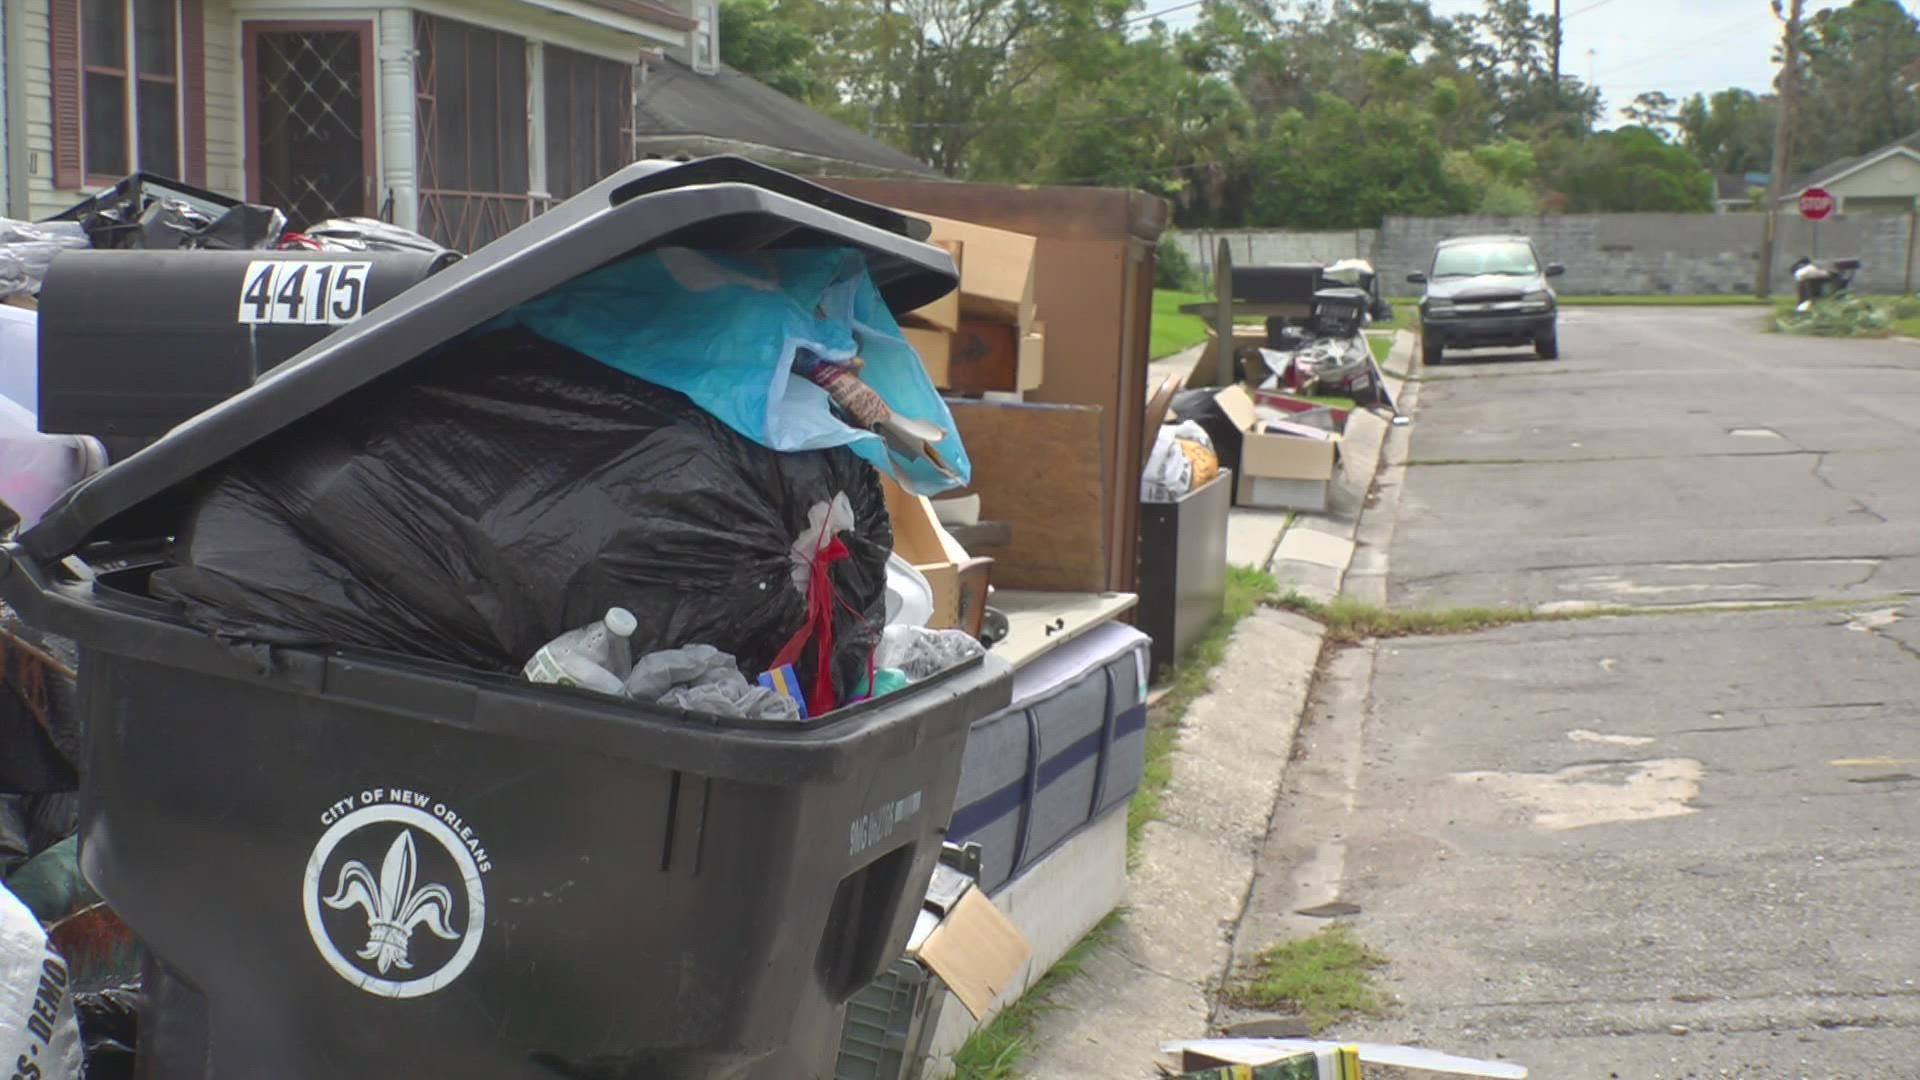 New Orleans had problems picking up the trash even before Hurricane Ida. Now, they're wondering if it will ever get picked up.